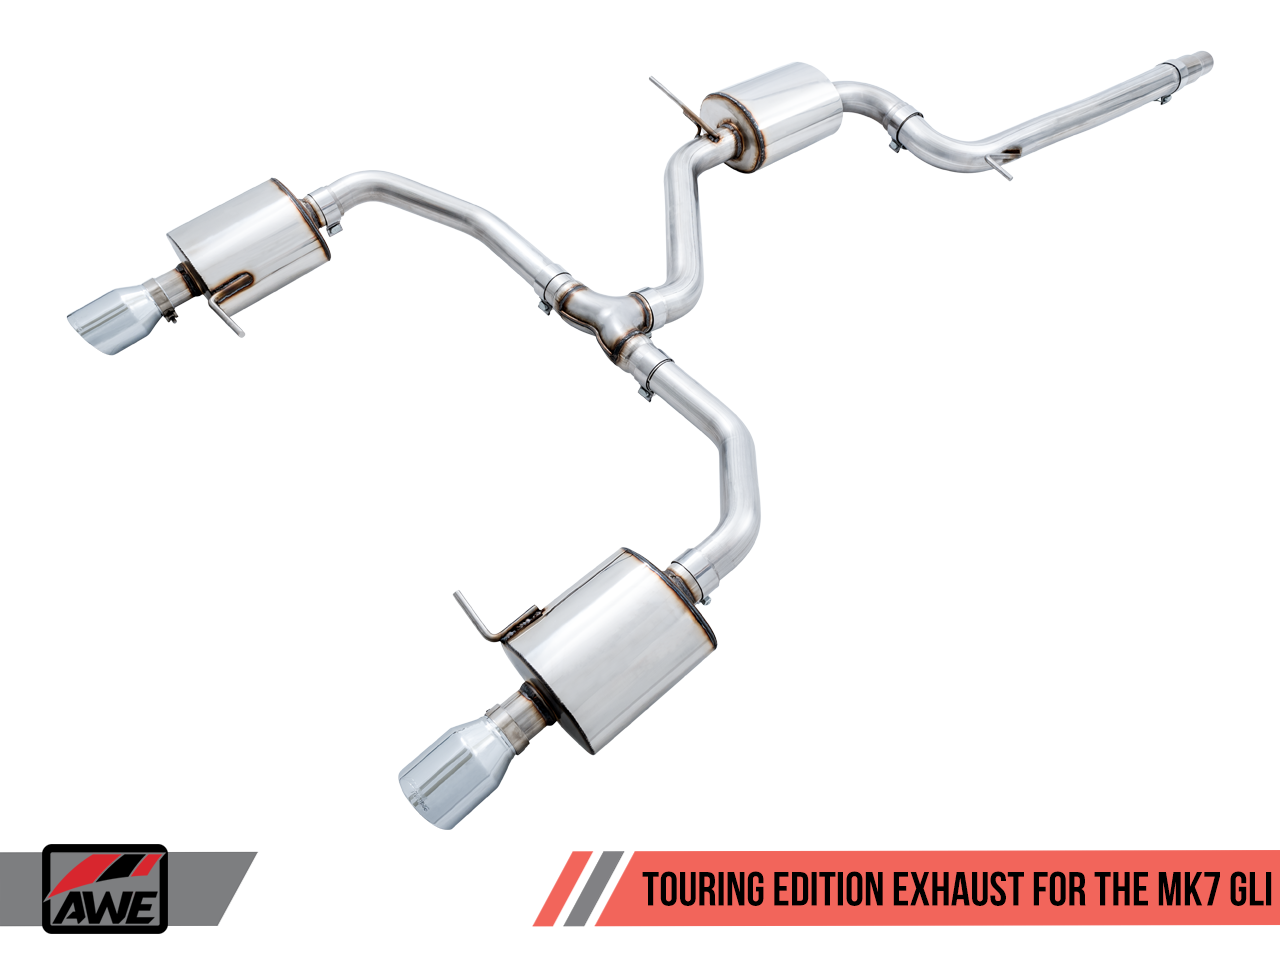 AWE Touring Edition Exhaust for MK7 Jetta GLI w/ High Flow Downpipe (not included) - Motorsports LA